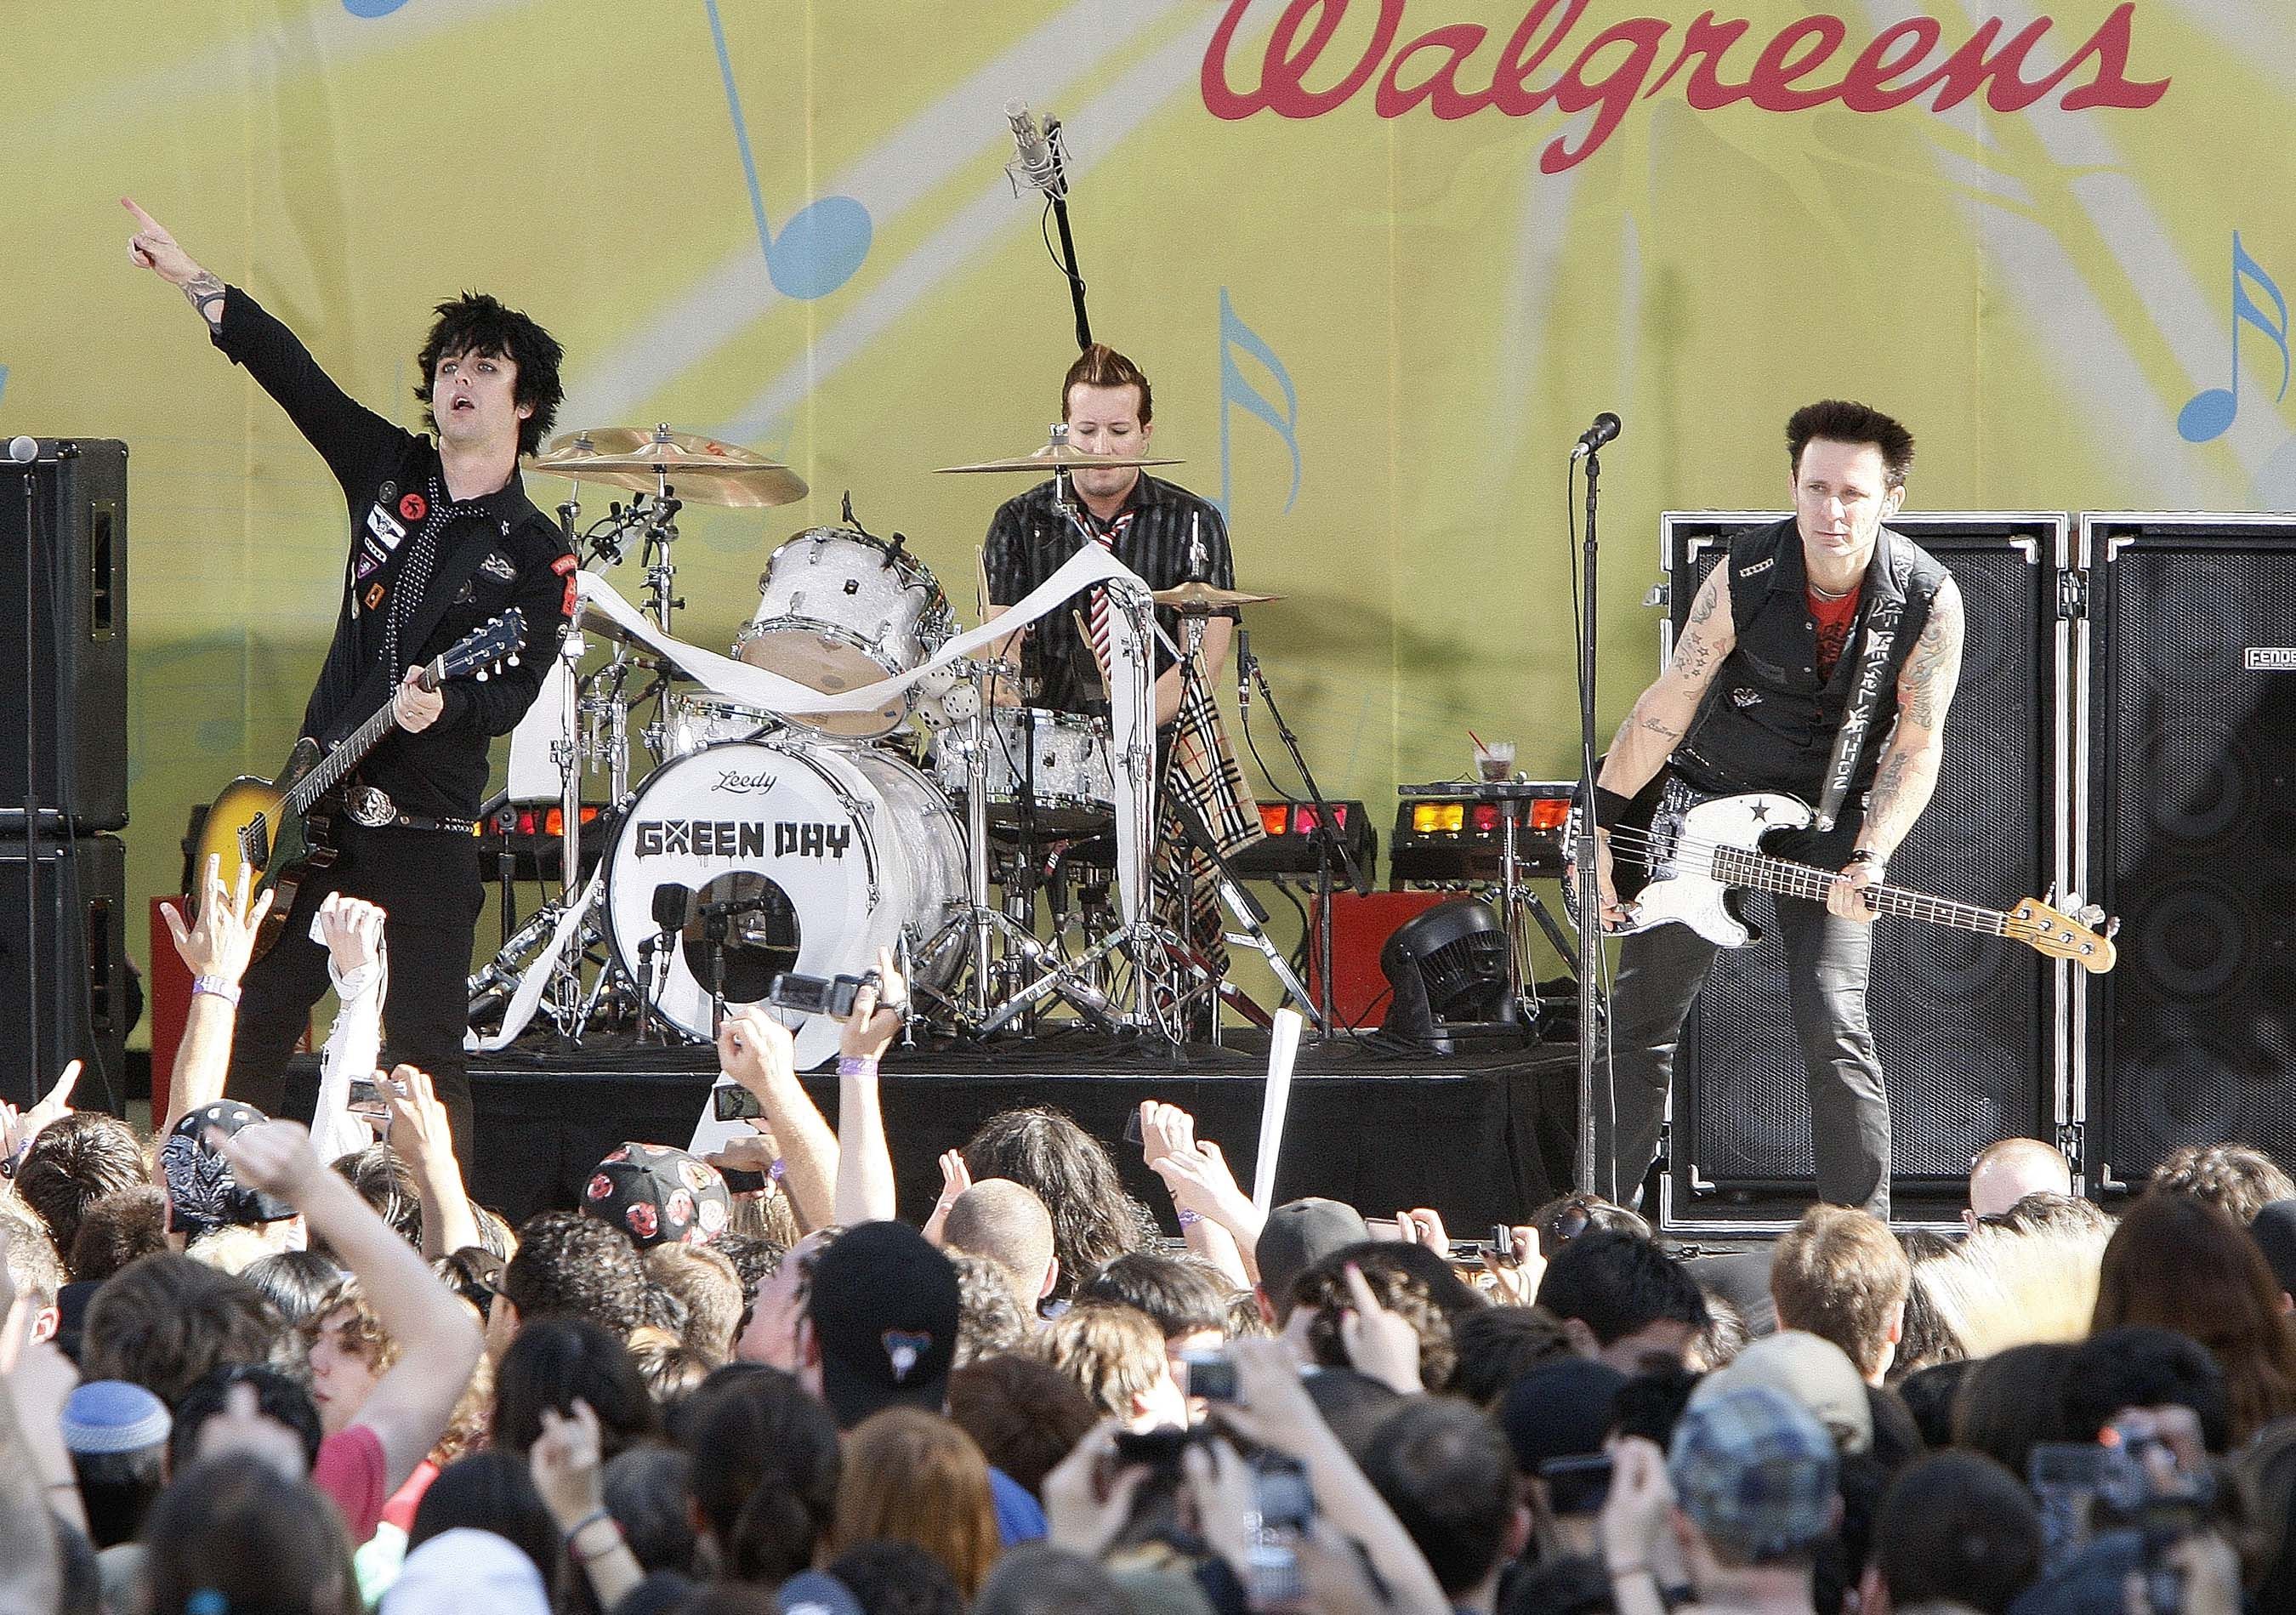 Green Day on stage